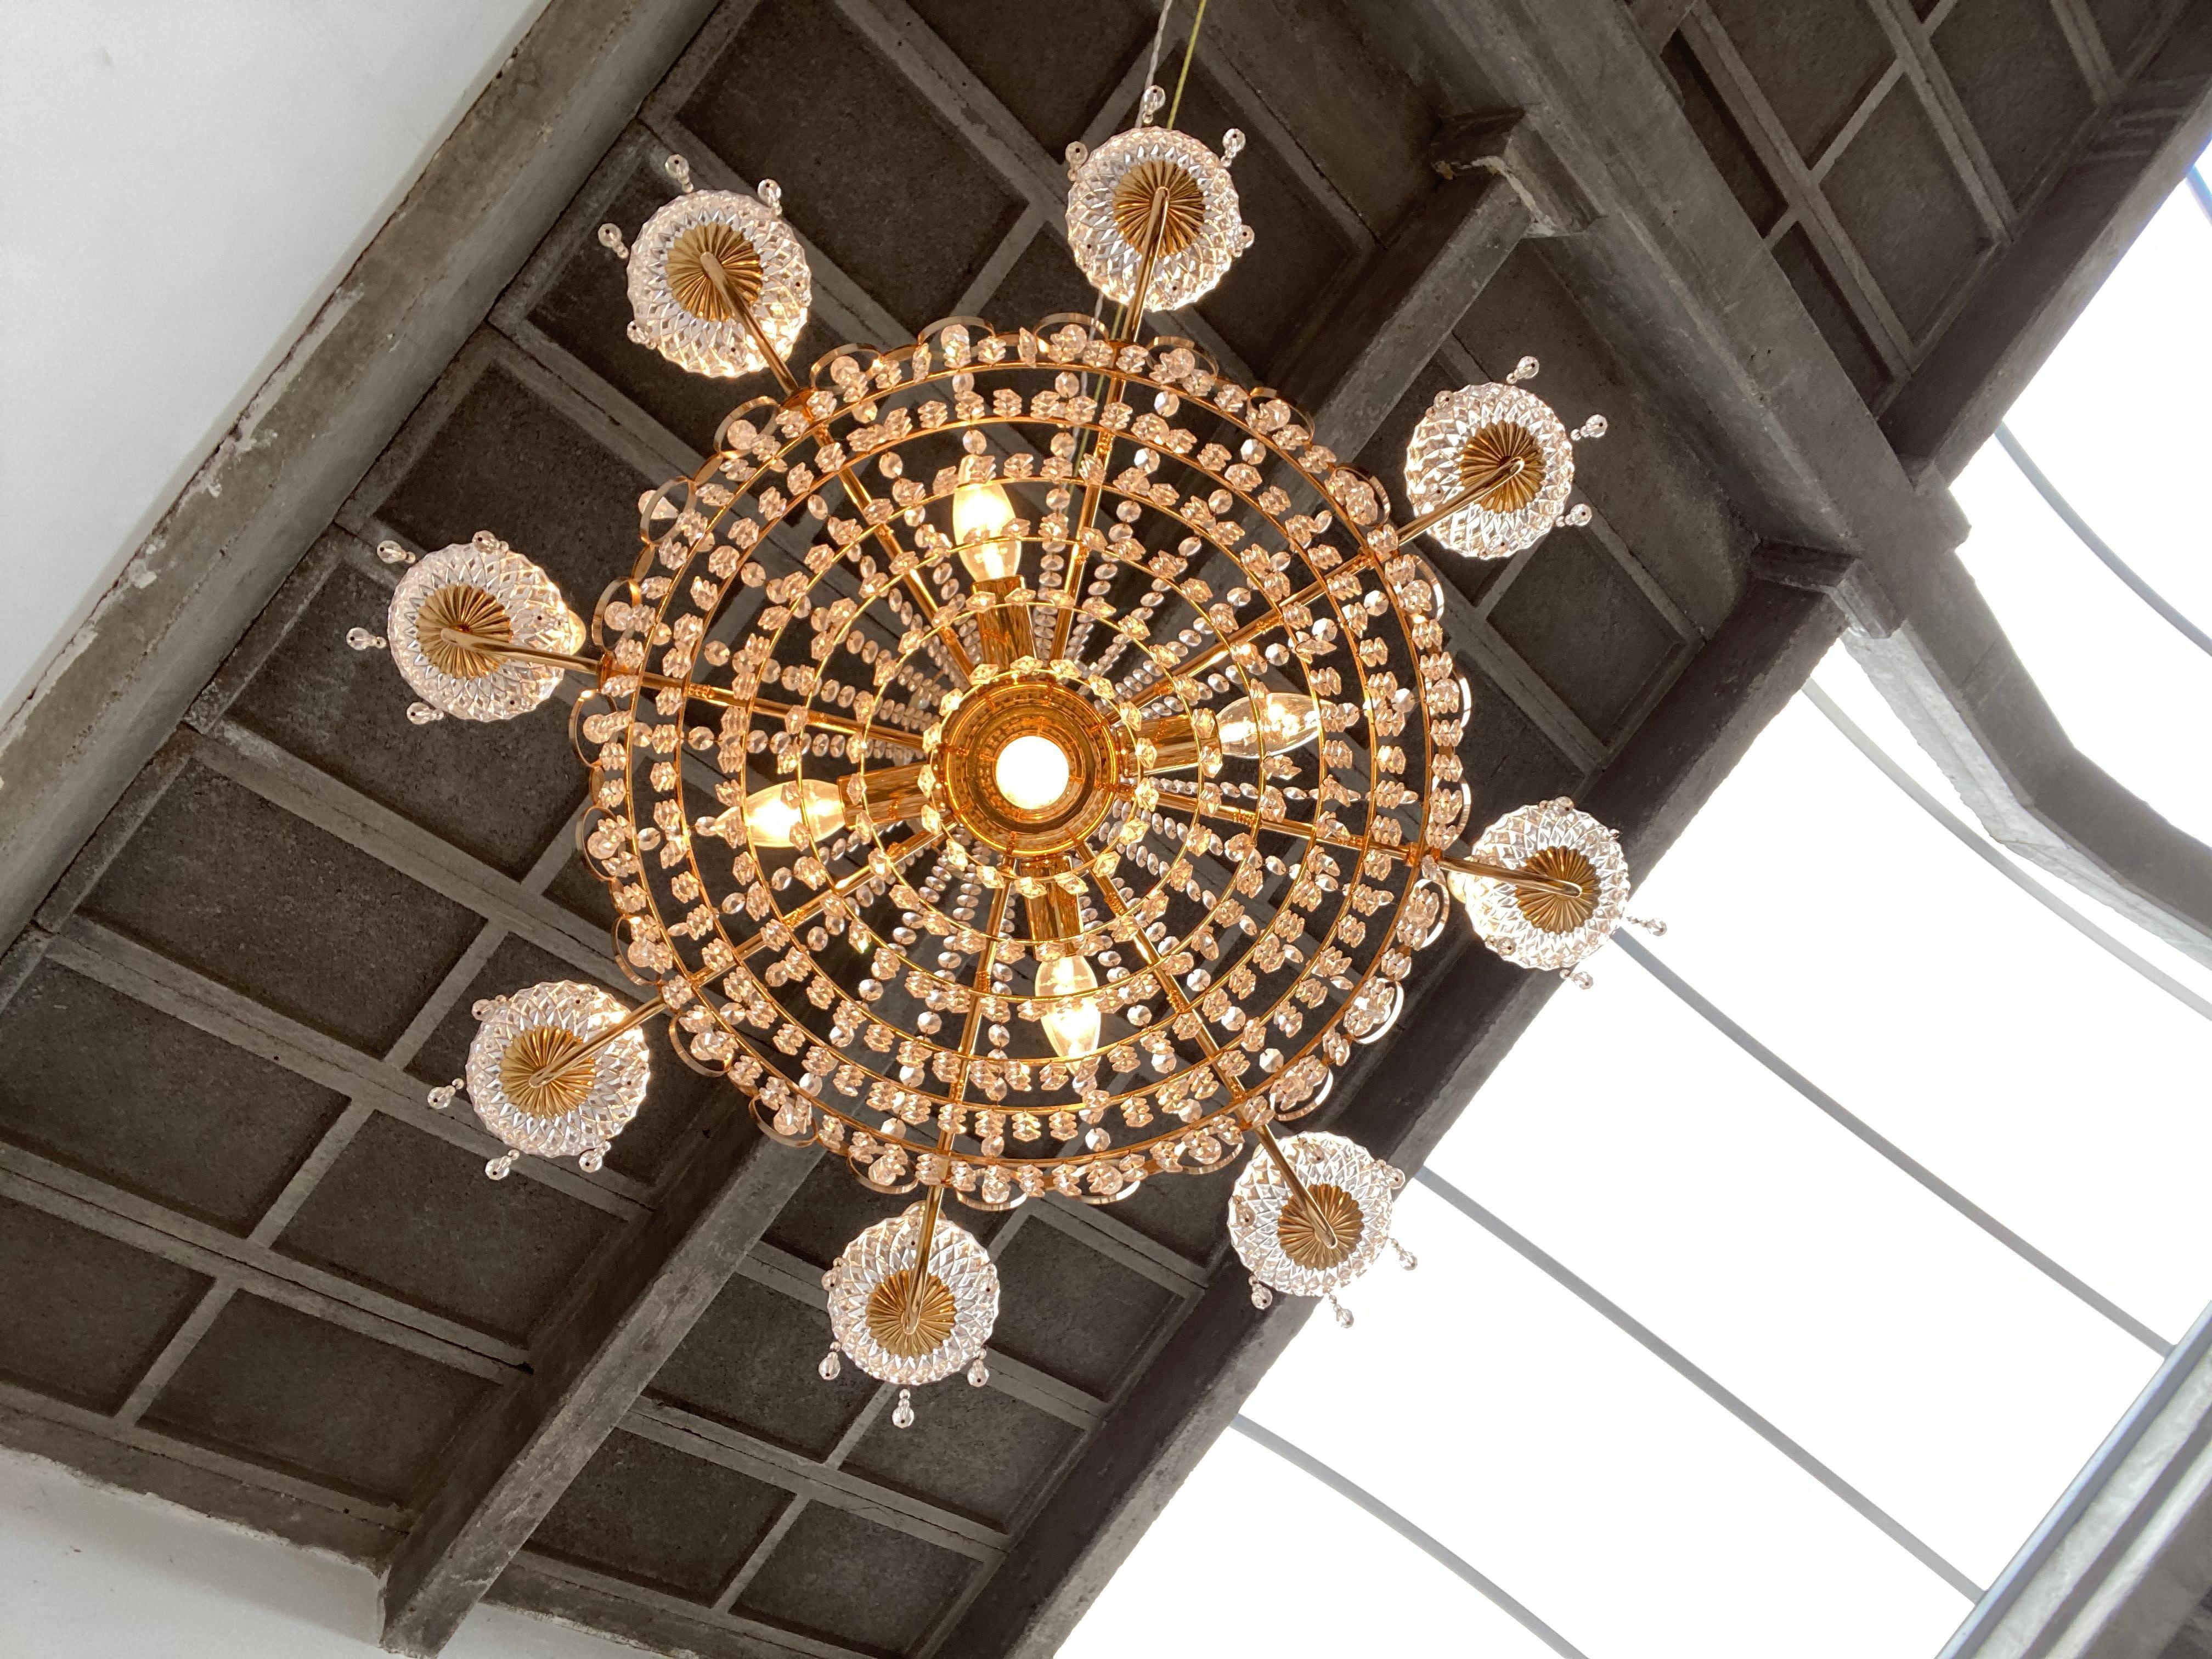 Palme & Walter founded the company Palwa K.G. Gross-Umstadt, Germany and specialised in luxurious lighting 

Their 1960's and 1970's crystal and gilt brass chandeliers have a nice space age detail (ring details) that are almost characteristic for